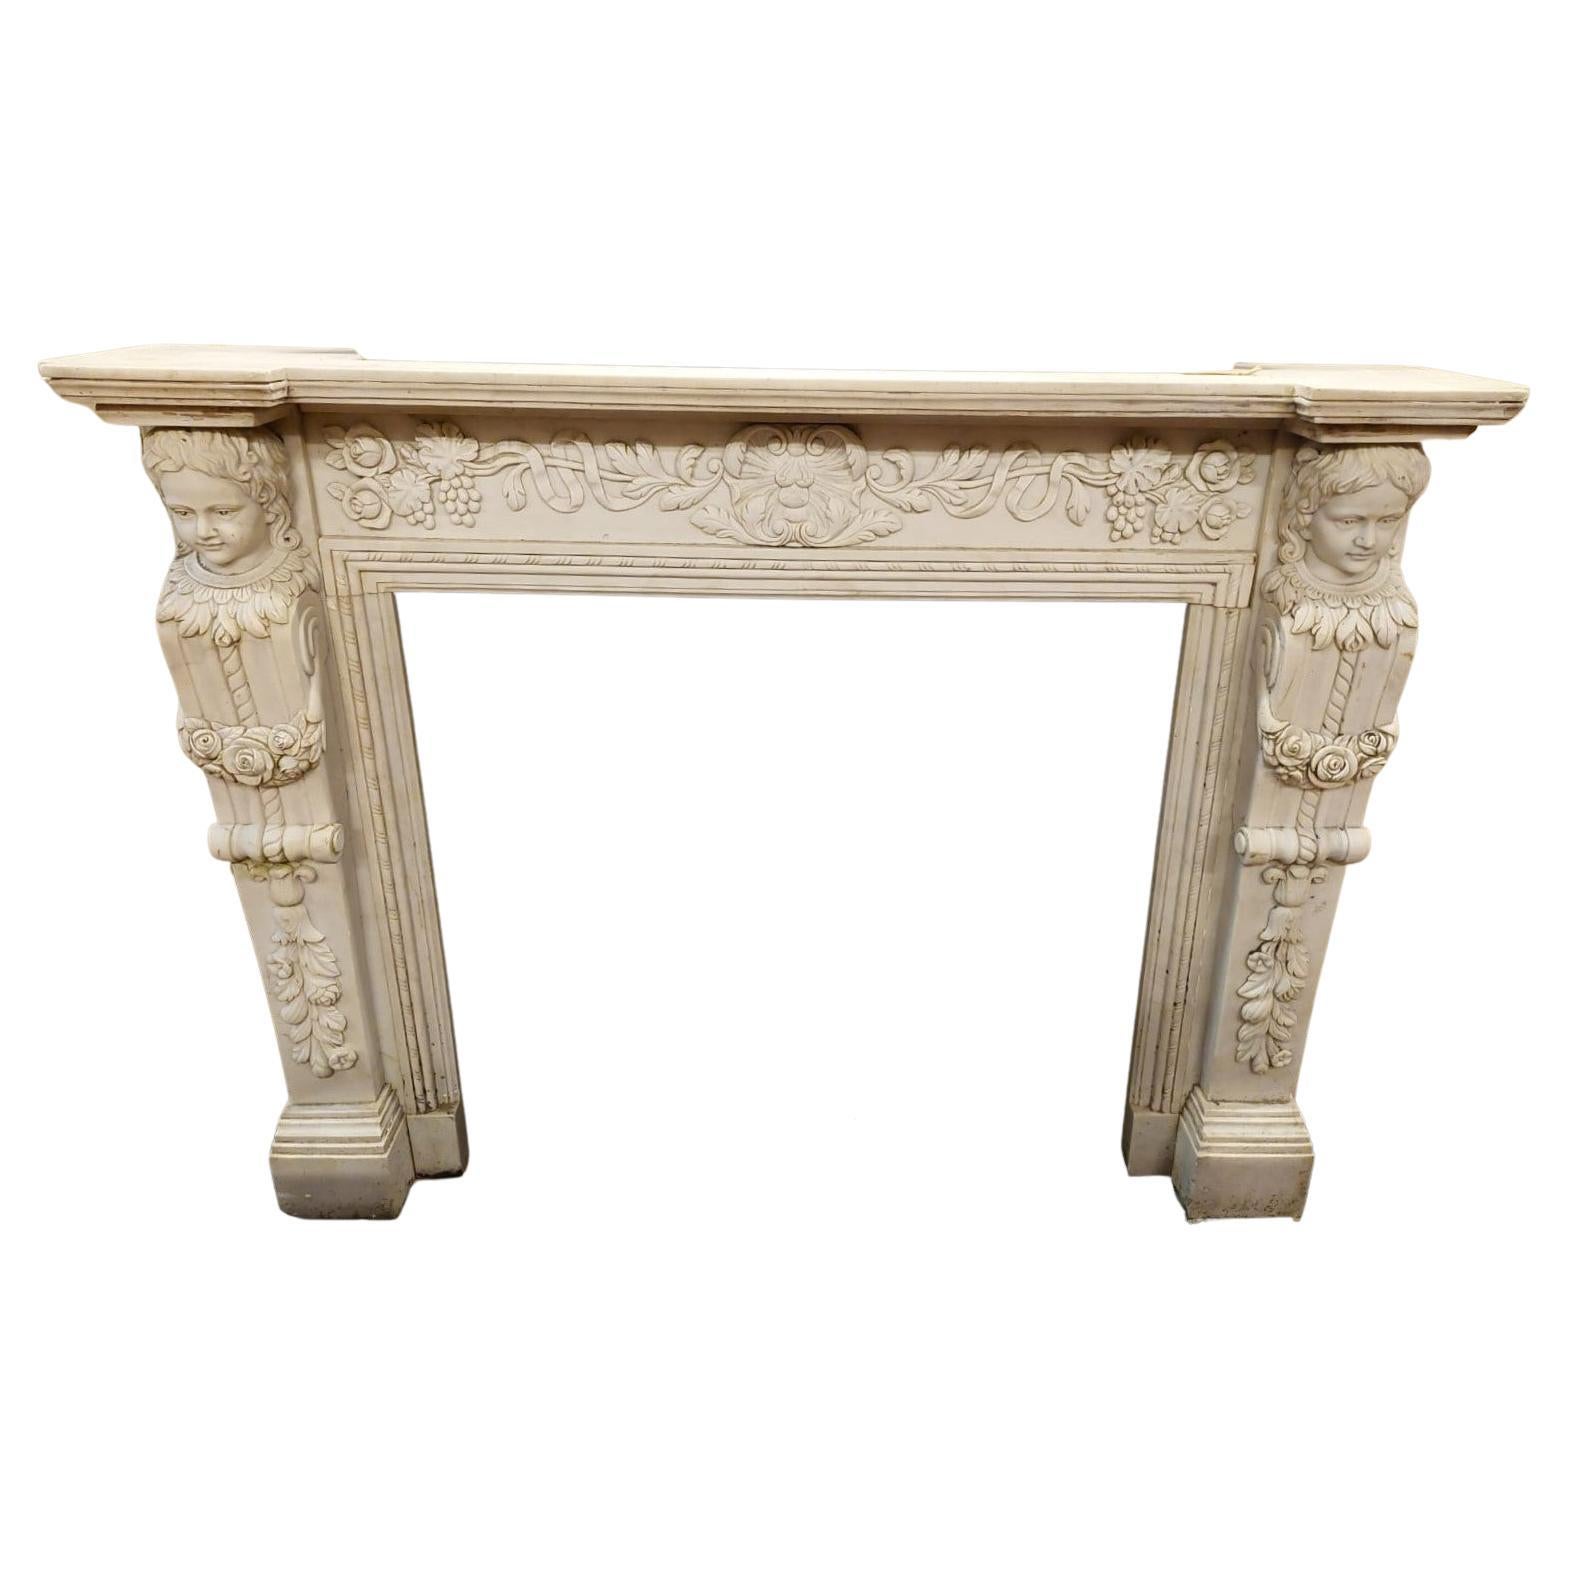 Antique White Carrara Marble Fireplace, Carved Caryatids, 19th Century Italy